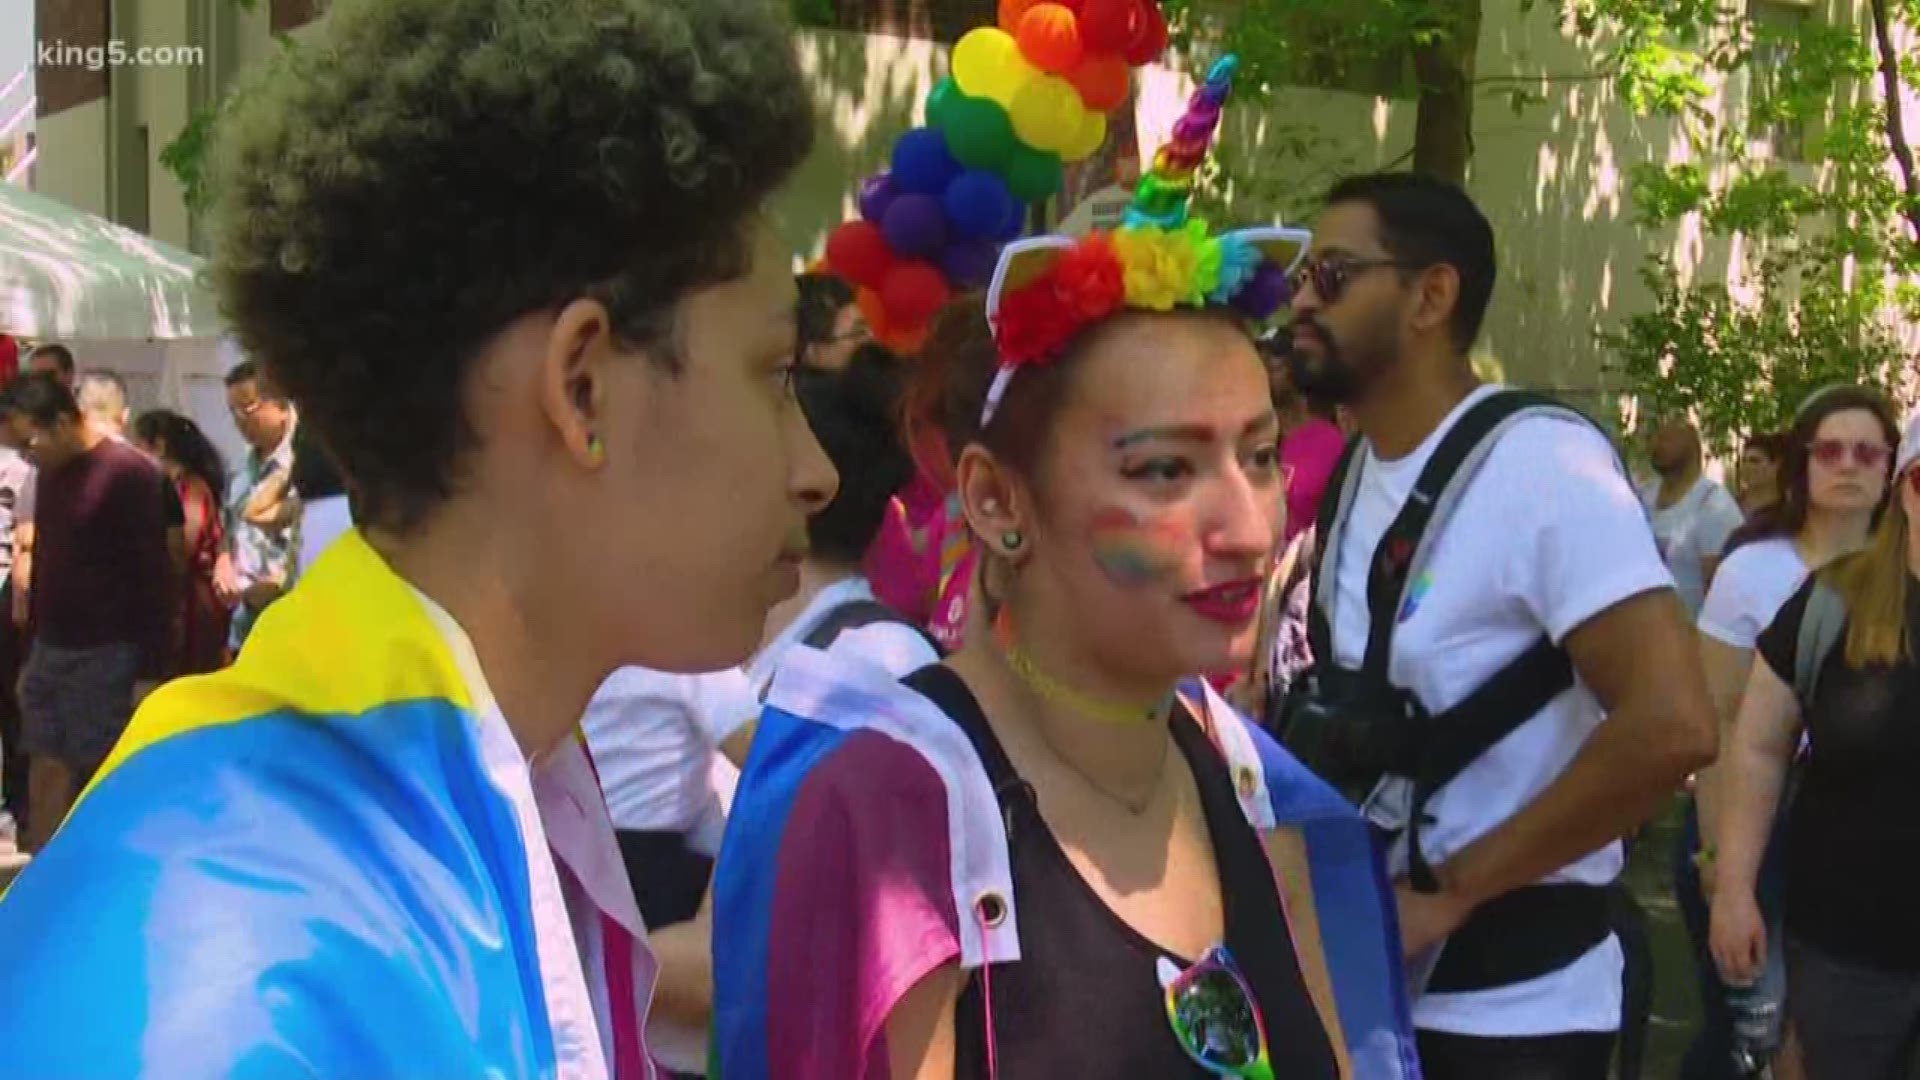 Tens of thousands of people packed into downtown Seattle this weekend to celebrate the city's 45th annual pride parade. KING 5's Kalie Greenberg reports.